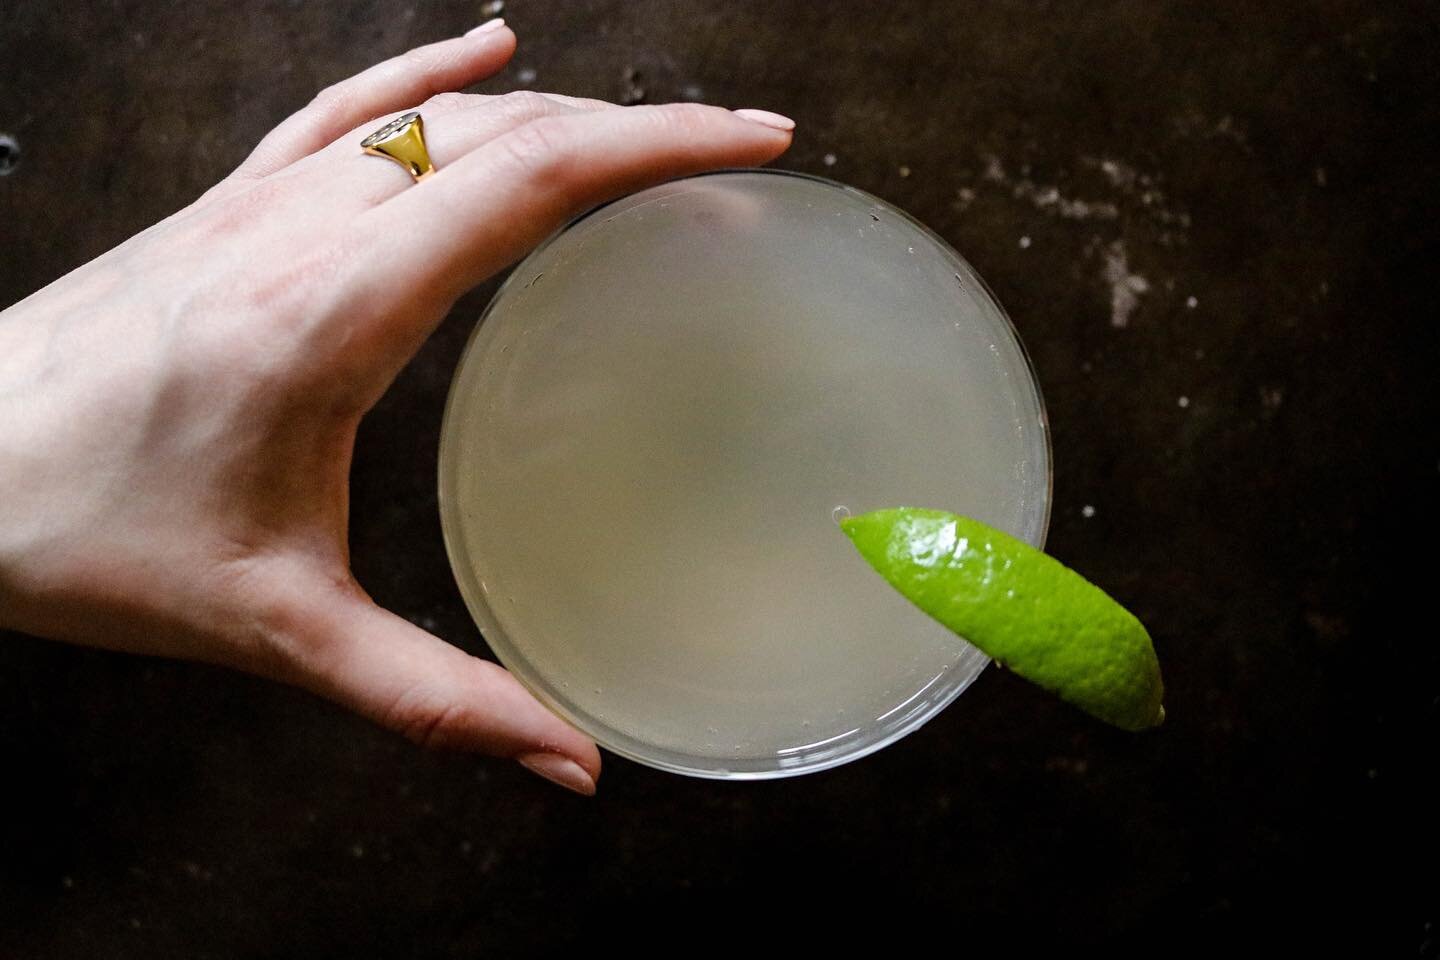 When you're in the mood for gin but want to mix it up, try the Pegu Club cocktail. It's classic, tart, and complex. ⁠⠀
⁠⠀
Gin⁠⠀
Cointreau⁠⠀
Lime⁠⠀
Bitters⁠⠀
.⁠⠀
.⁠⠀
.⁠⠀
.⁠⠀
.⁠⠀
⁠⠀
⁠⠀
#mobilebar #barcatering #cocktailbar #bartending #bartender #raleig